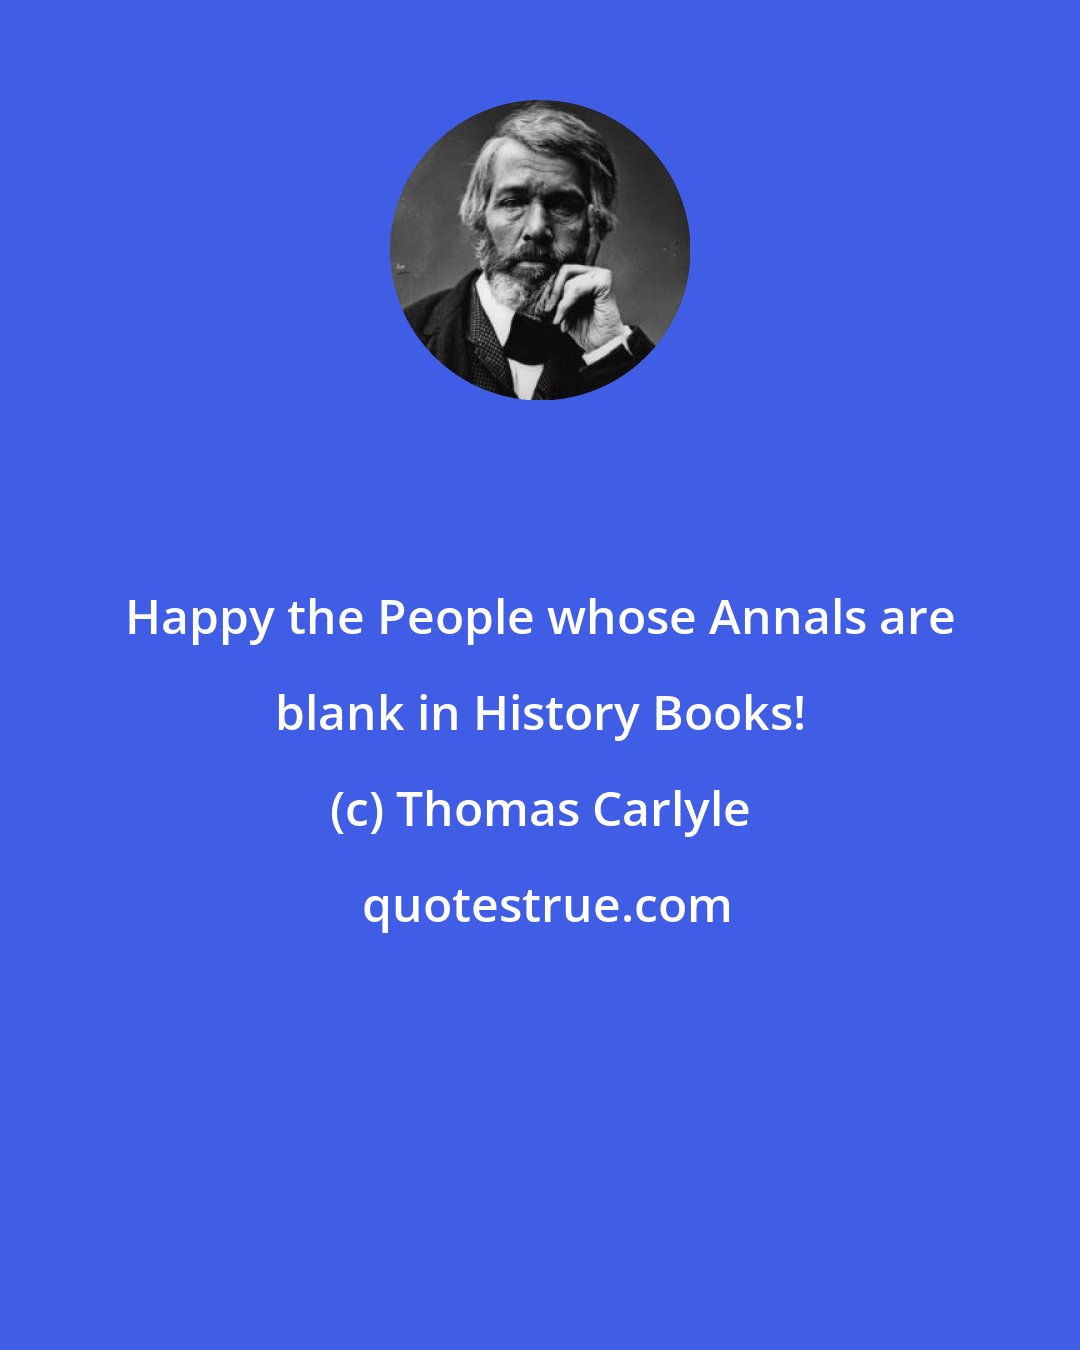 Thomas Carlyle: Happy the People whose Annals are blank in History Books!